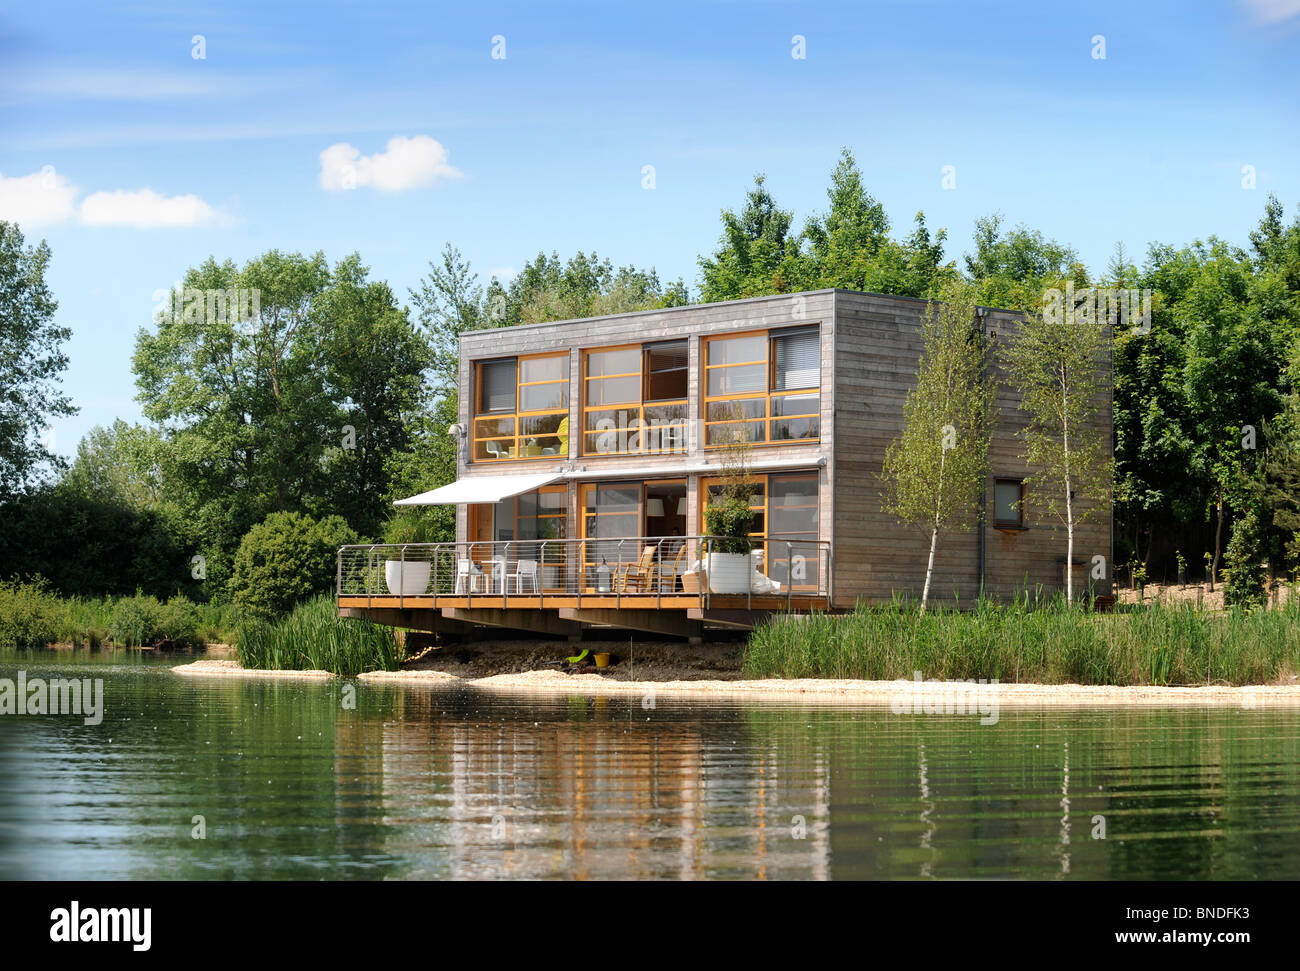 The 'Second home' development The Lakes By Yoo near Cirencester, Gloucestershire UK Stock Photo